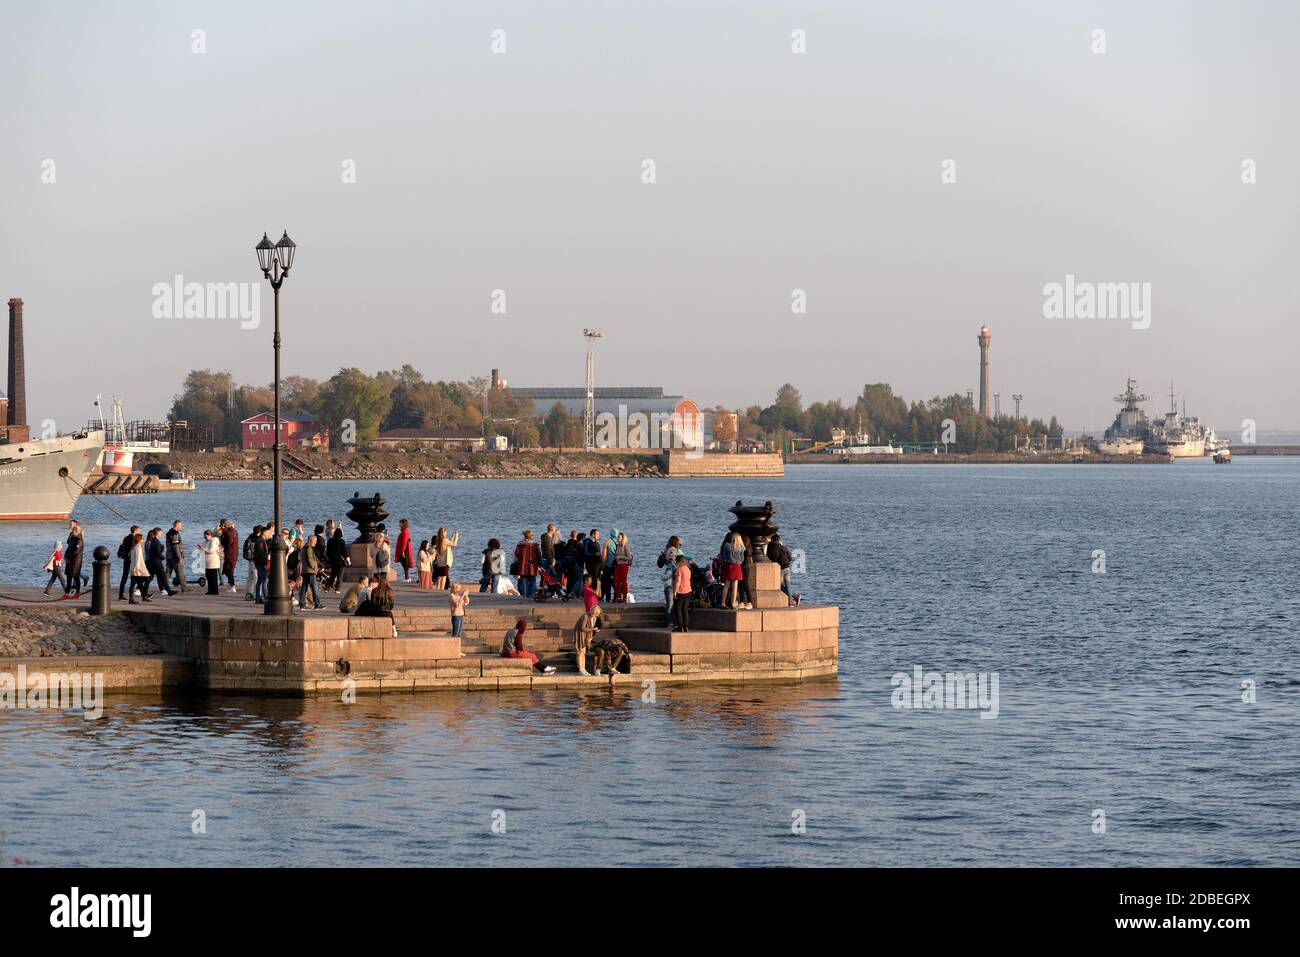 Kronstadt, Saint Petersburg, Russia — September 27, 2020: People look at the bay and take photographs at The Petrovskaya pier Stock Photo